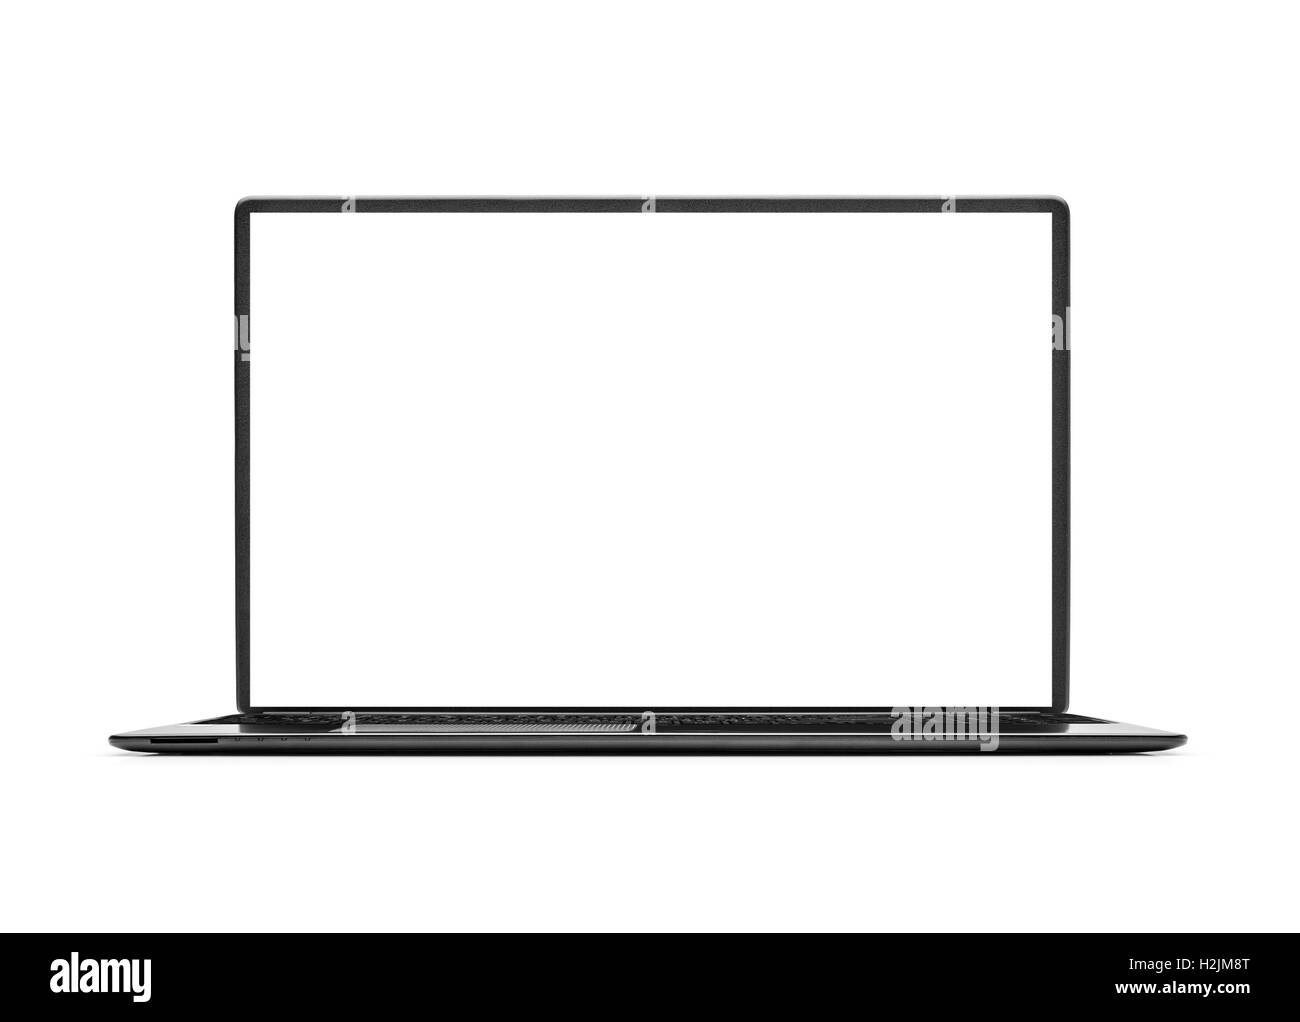 Laptop isolated on white background with clipping path. Stock Photo